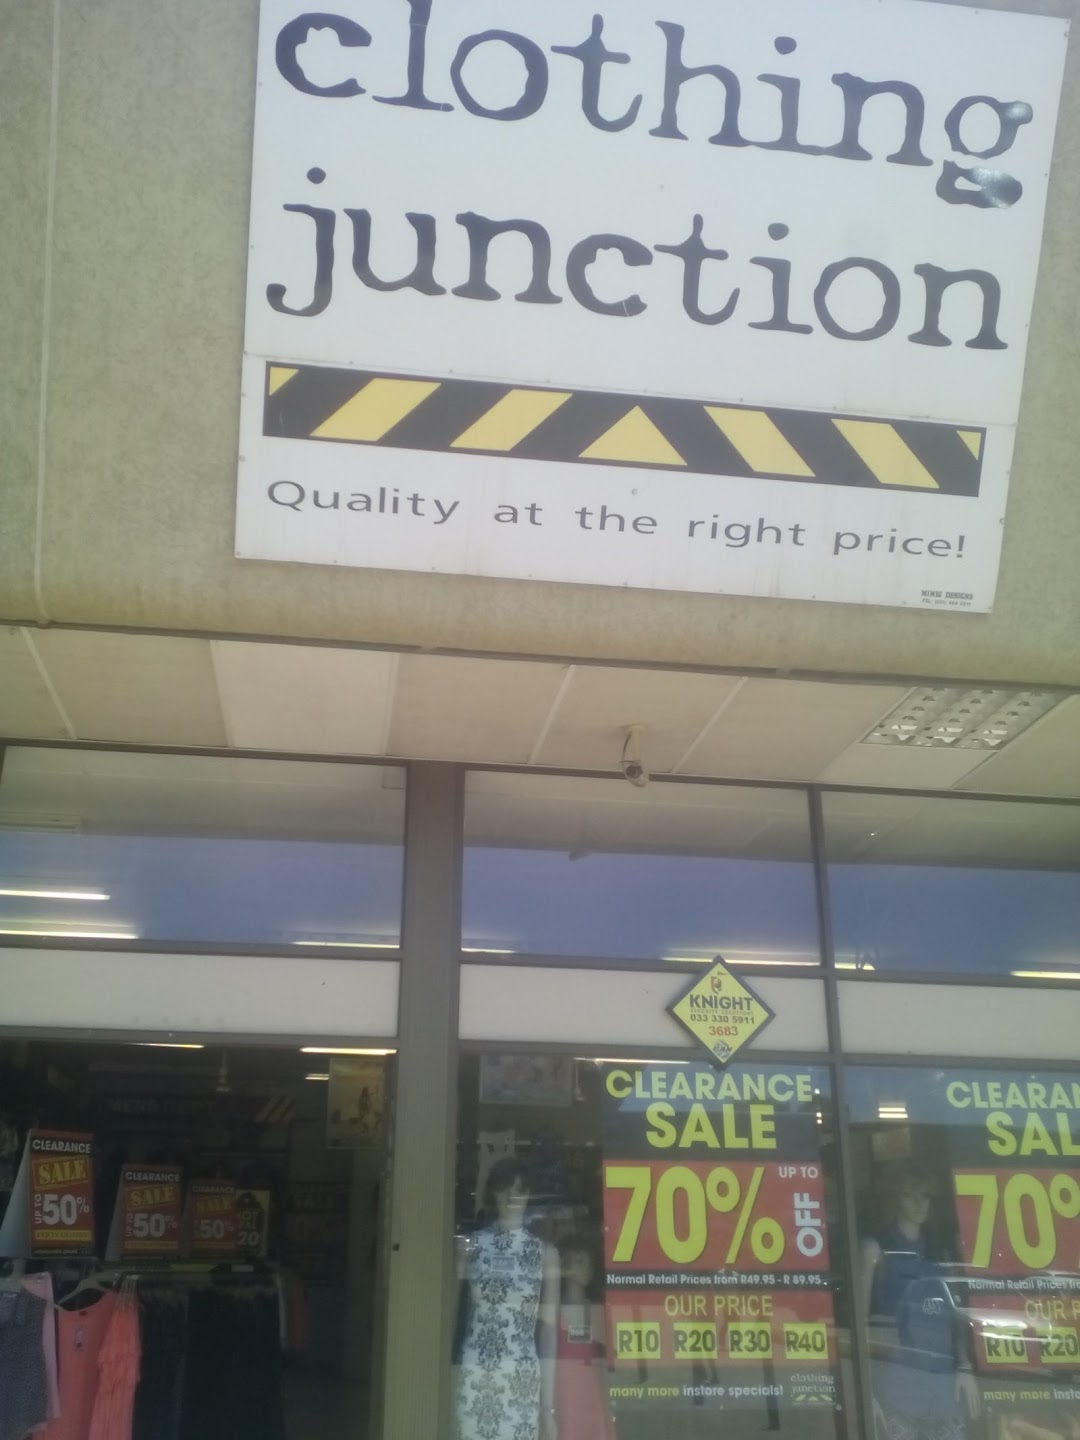 Clothing Junction